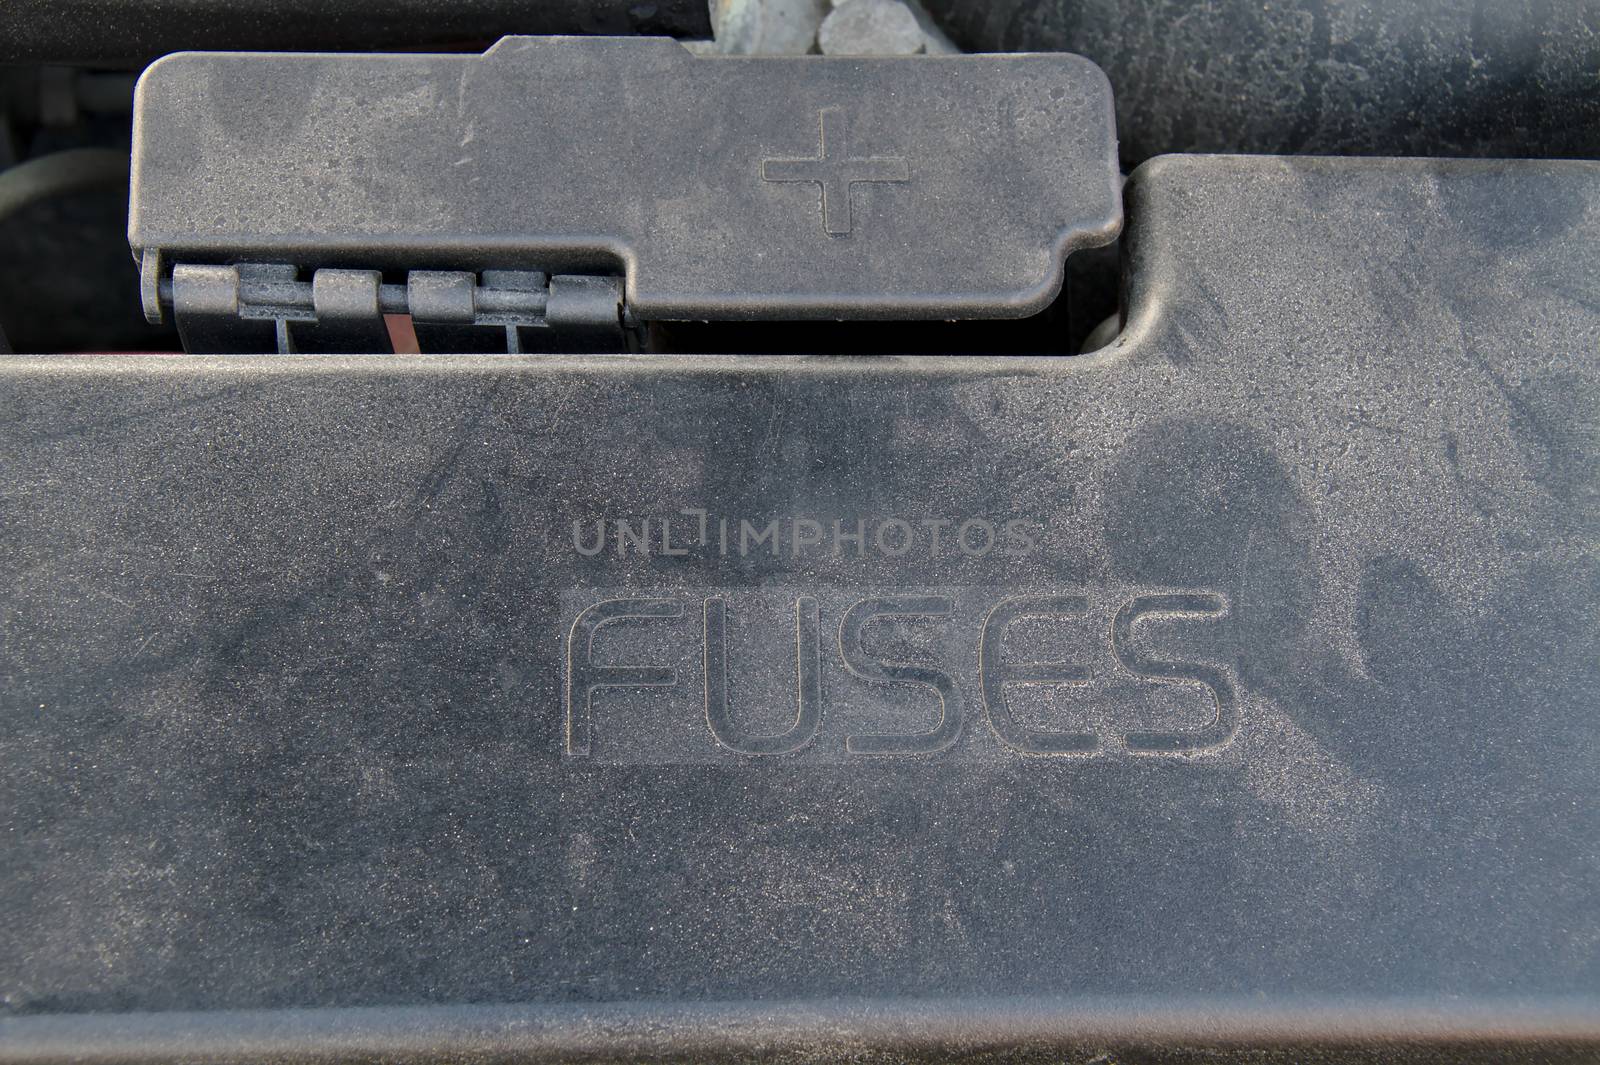 Cover of a under hood fuse box of a car. External plus terminal for jumper cables next to the fusebox. by Valokuva24